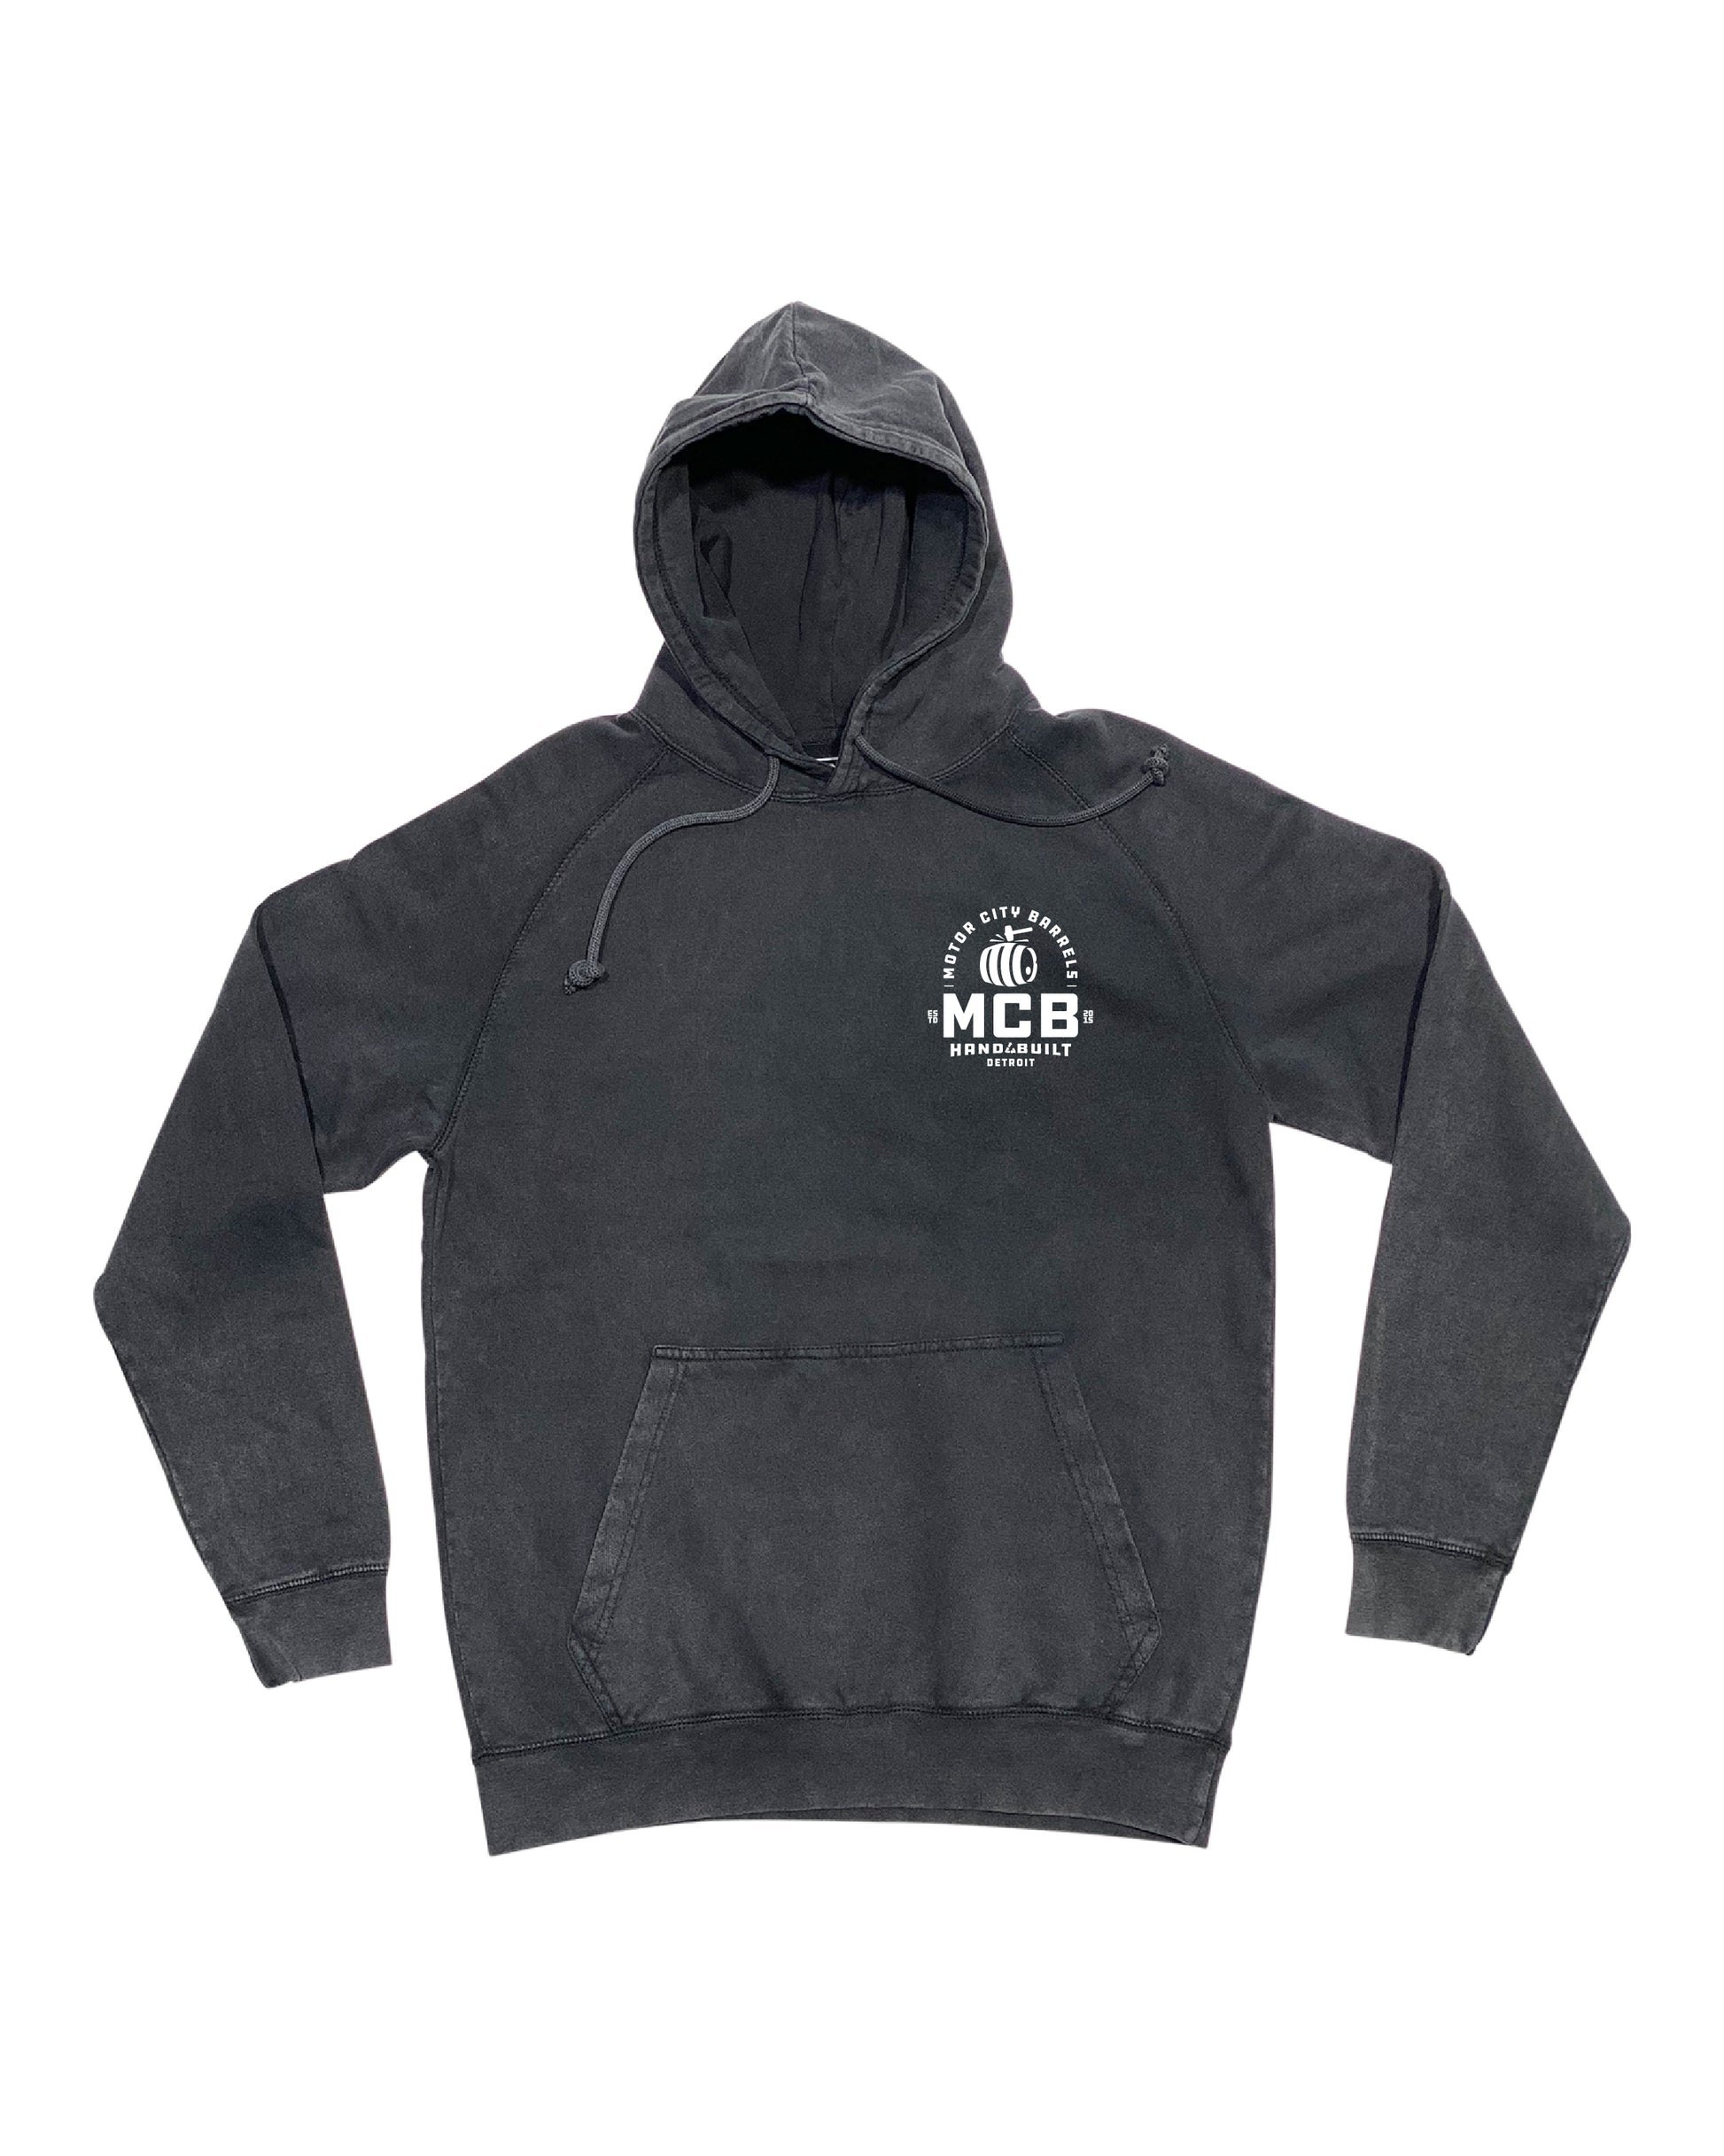 Unisex MCB Mineral Wash Hoodie in Charcoal - Motor City Barrels